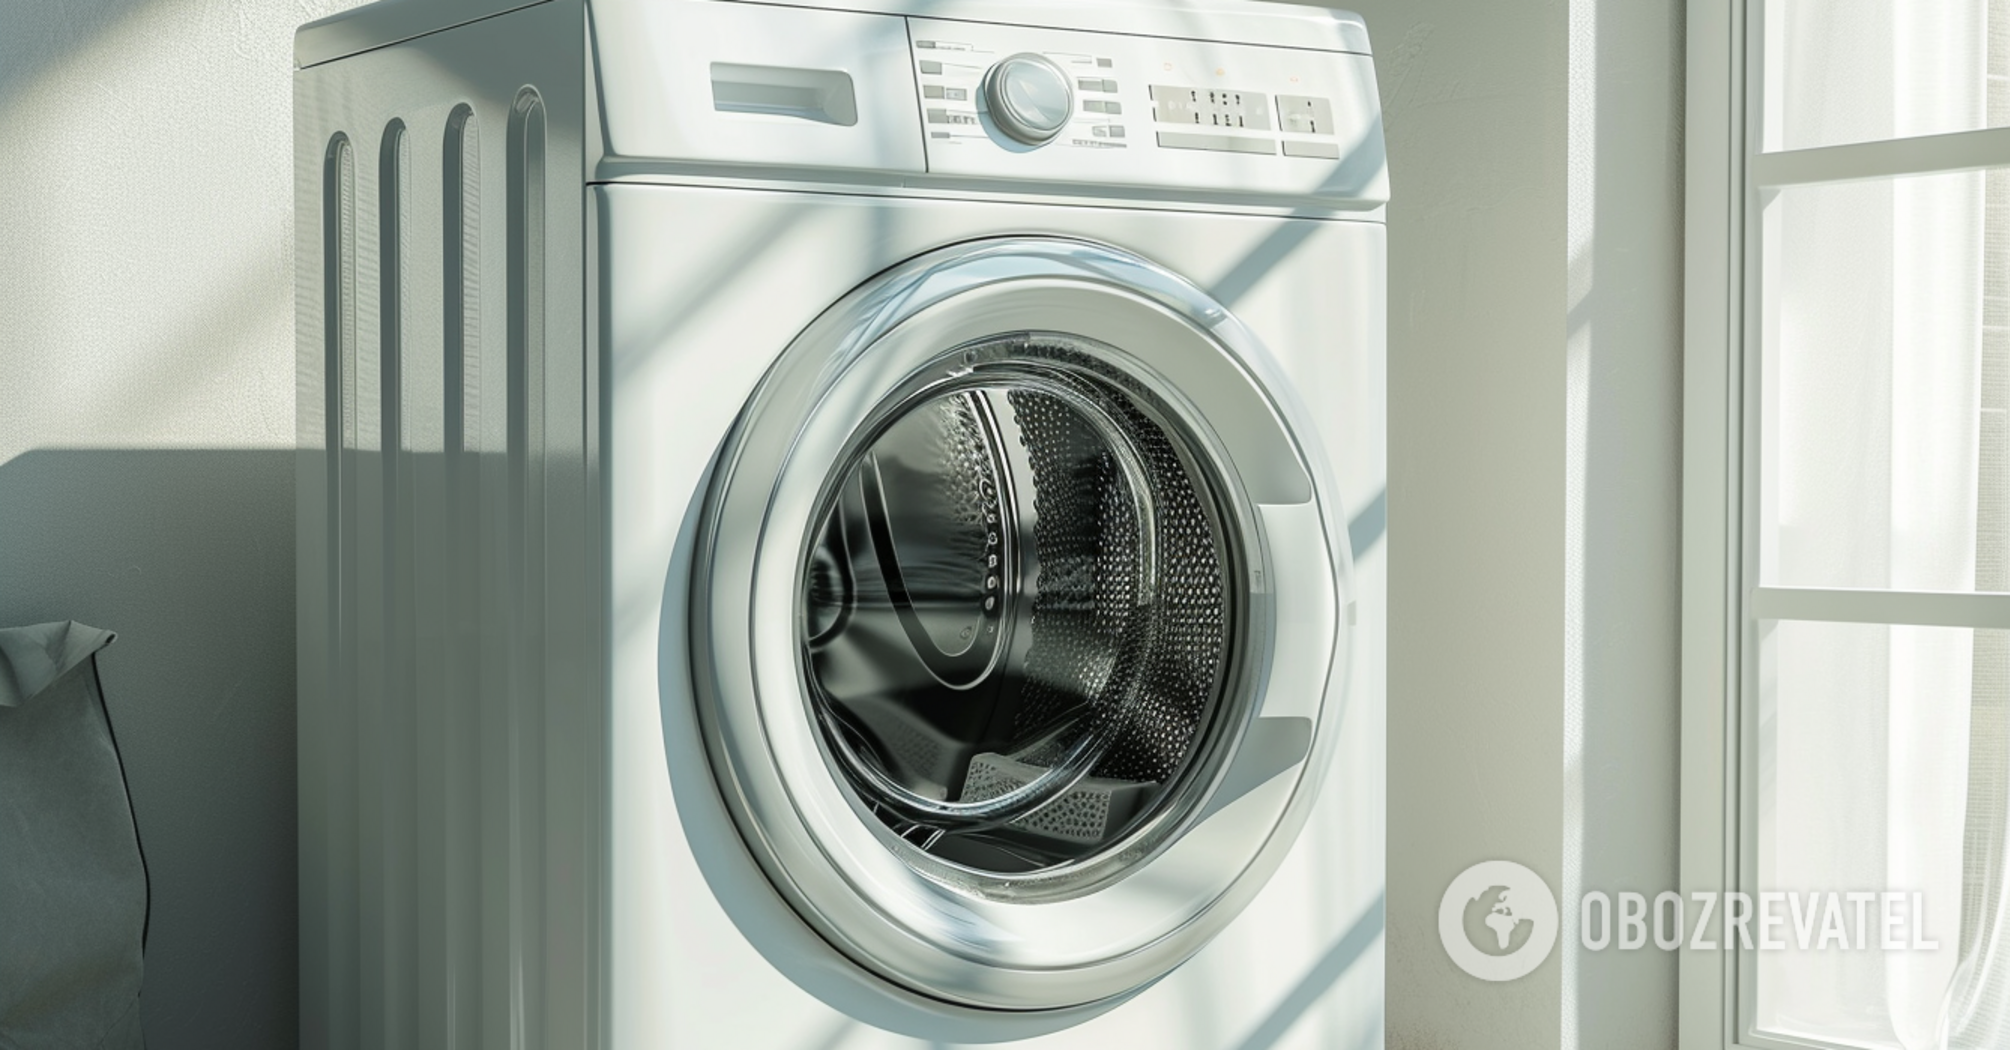 It only harms the laundry machine: what things should not be washed together